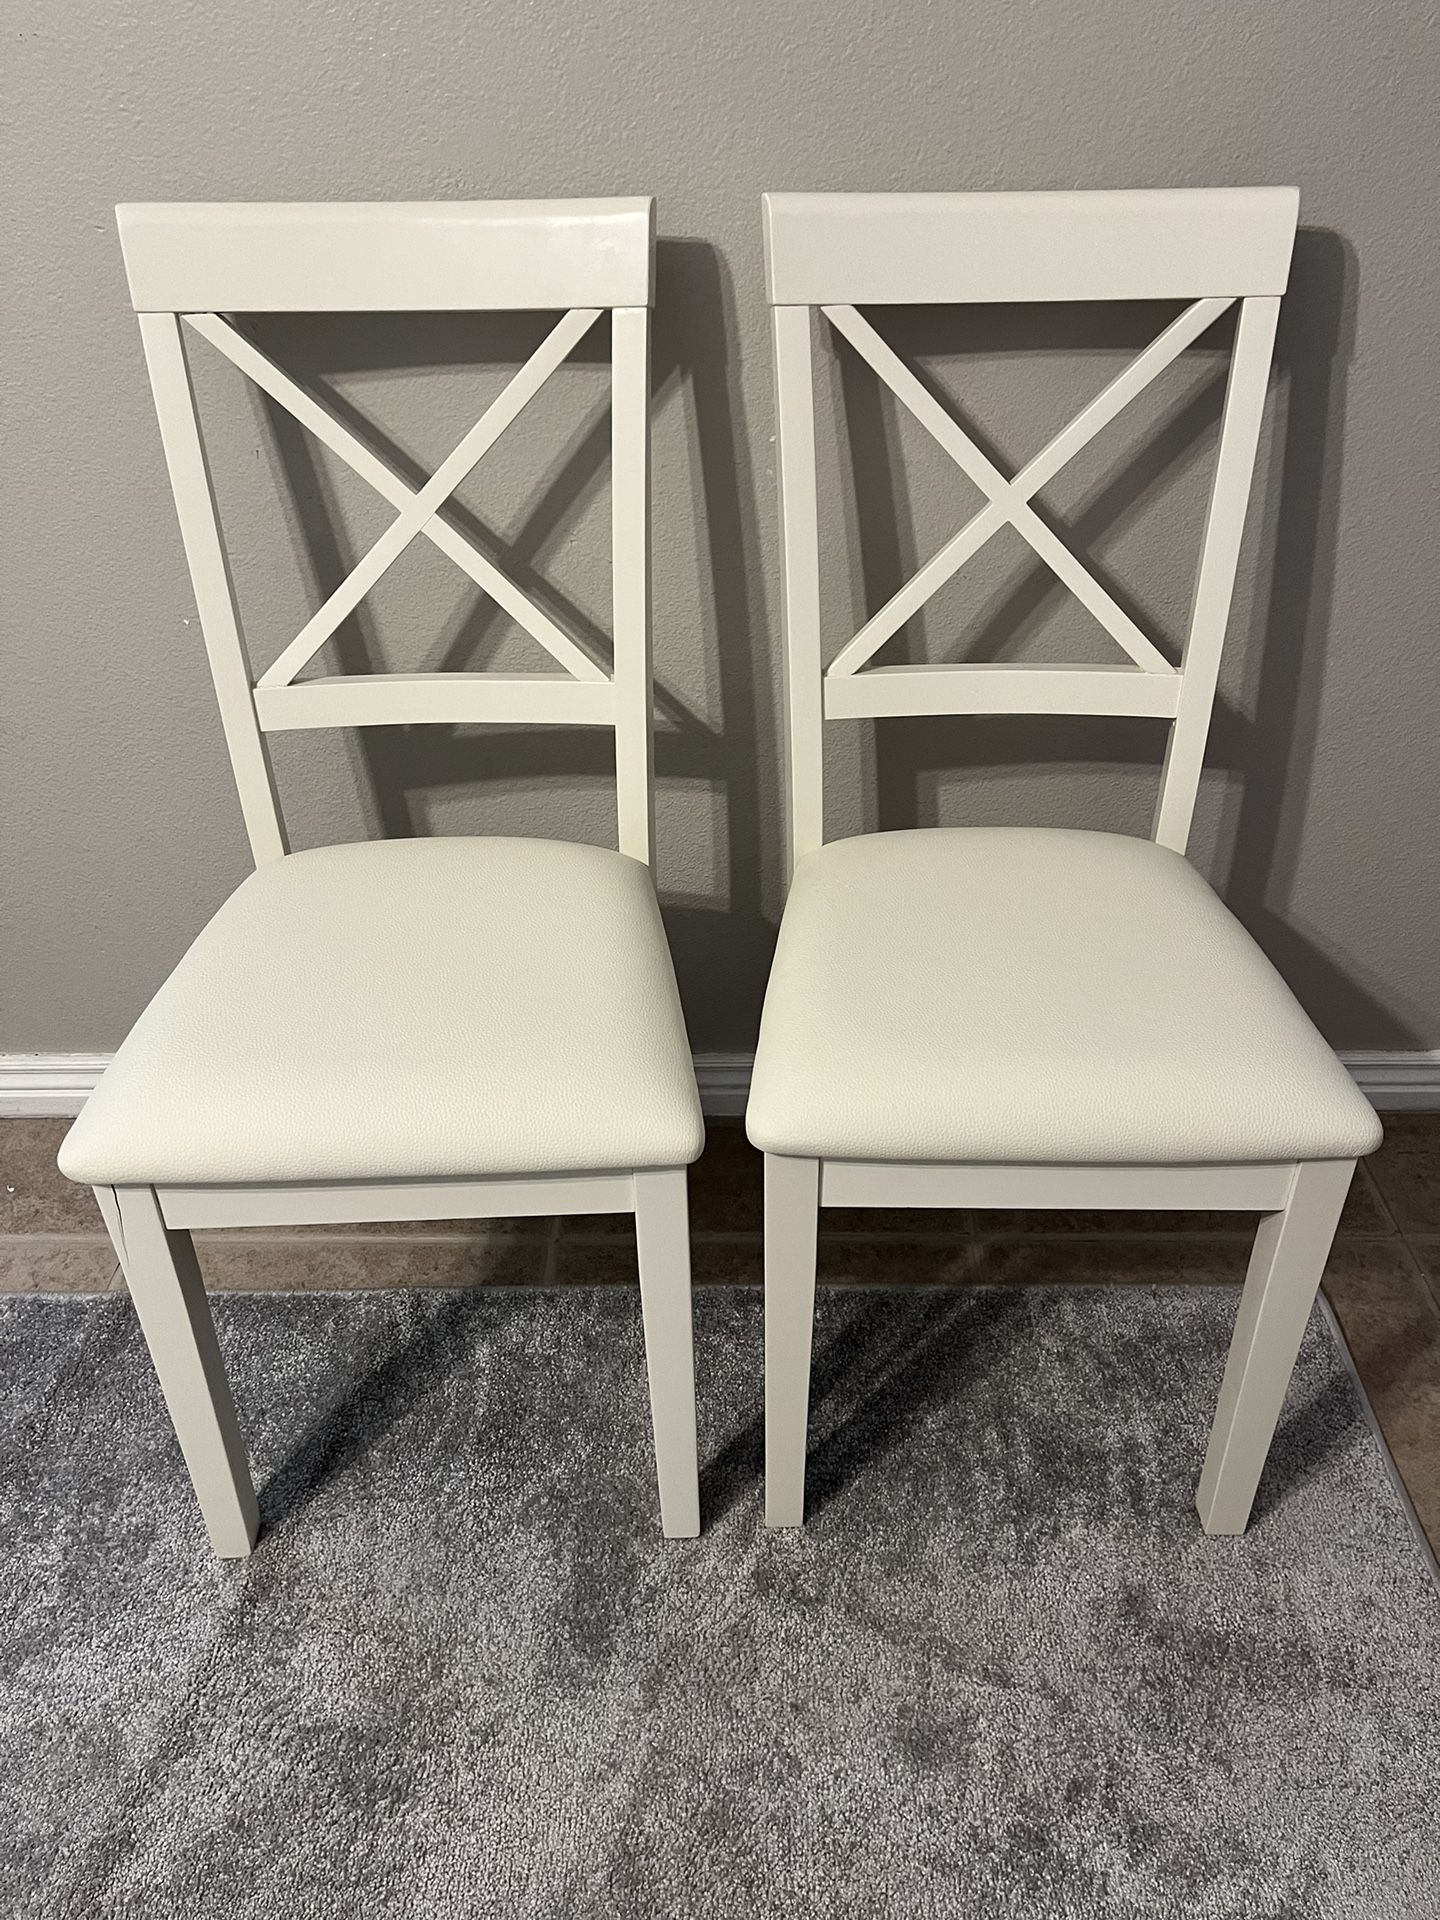 East West Furniture Boston Dinette Faux Leather Upholstered Wooden Chairs, Set of 2, Linen White